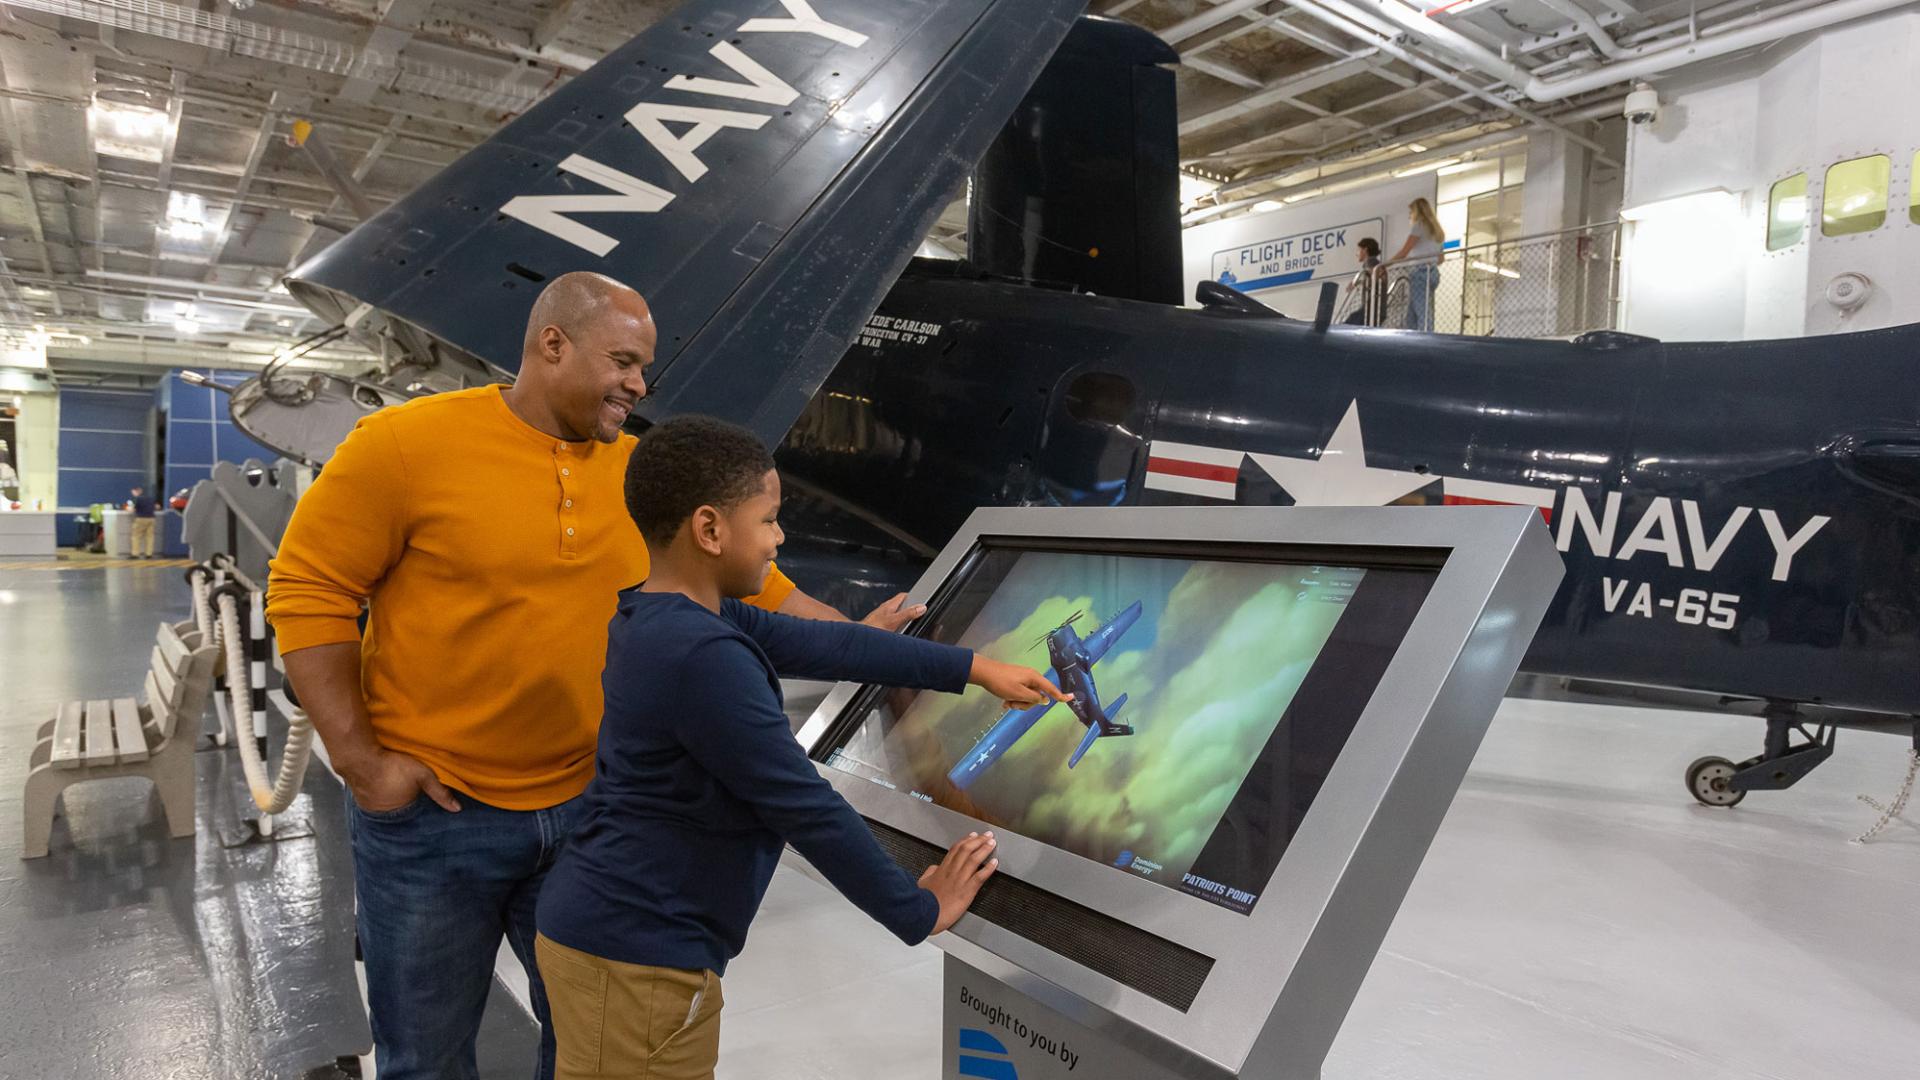 a father and son use a touch screen kiosk in front of a US Navy plane in a museum